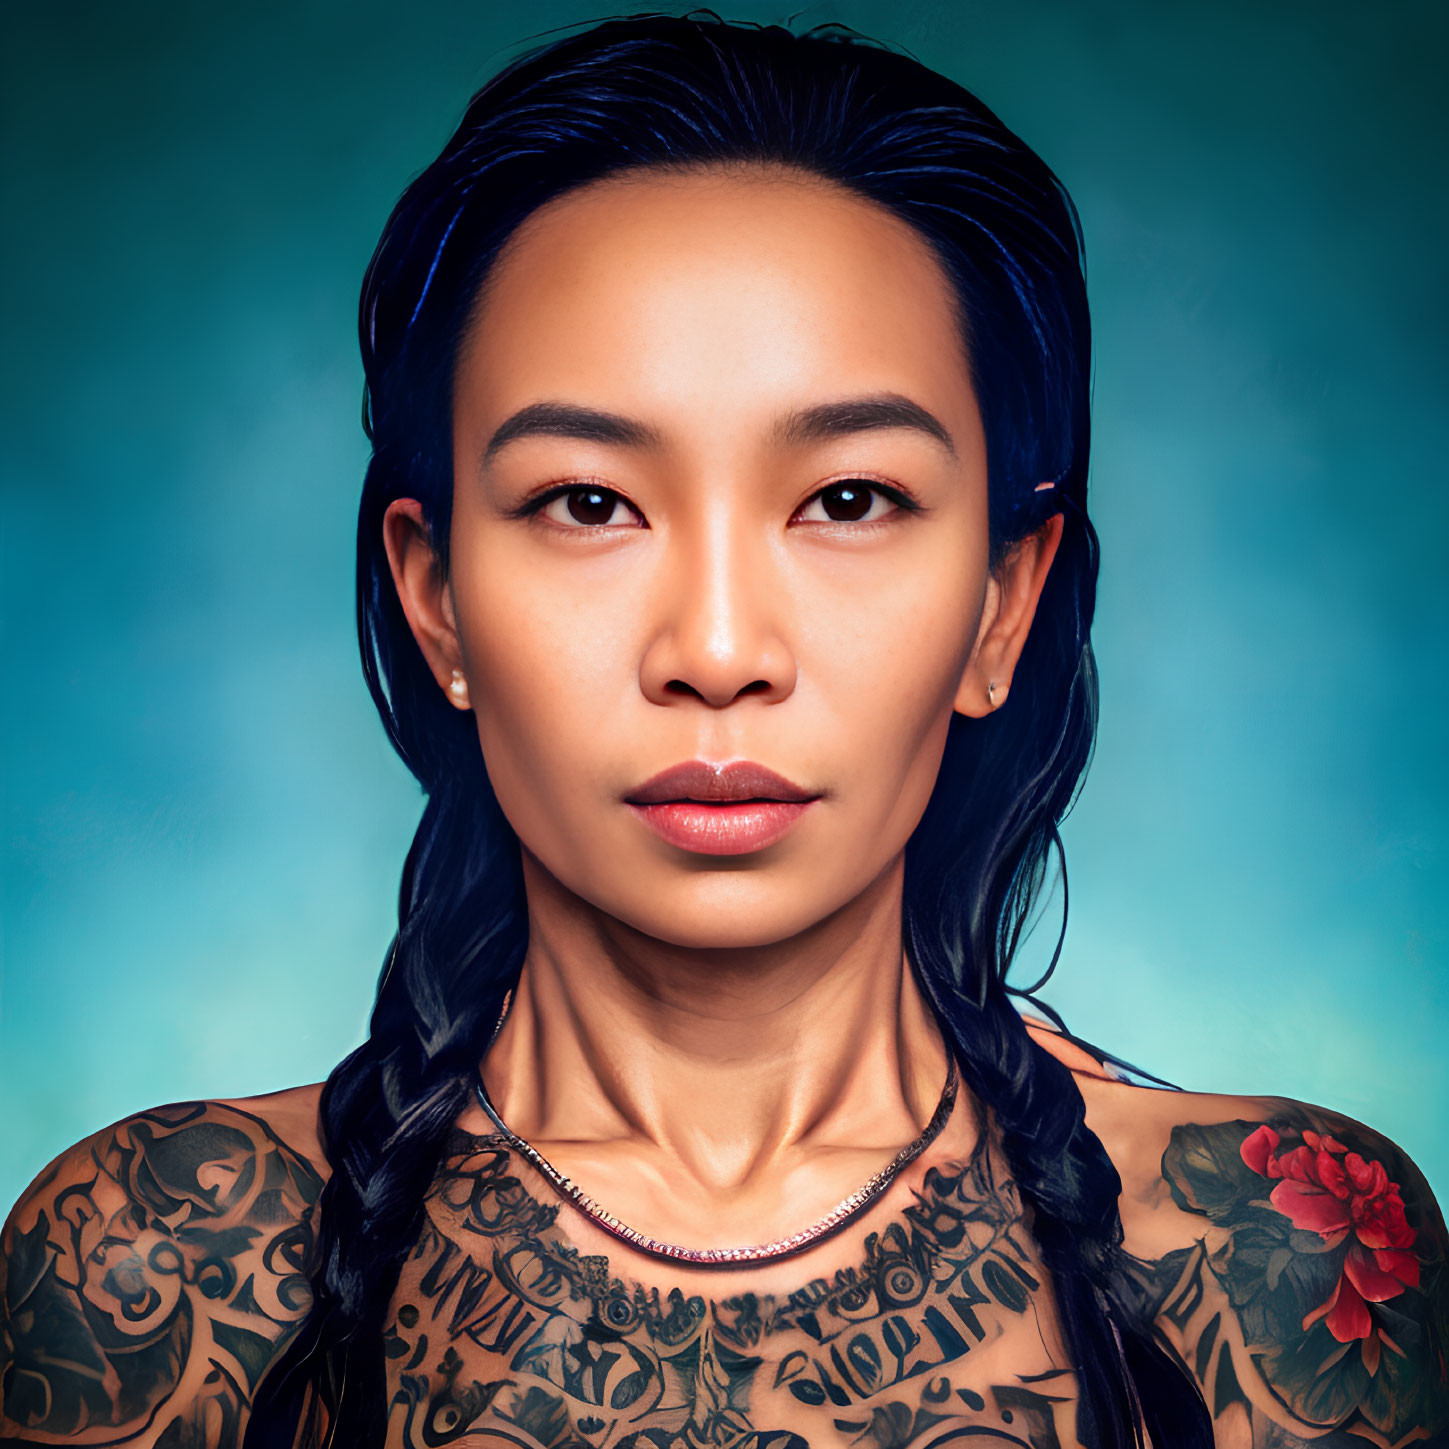 Dark-haired woman with tattoos and necklace on blue background